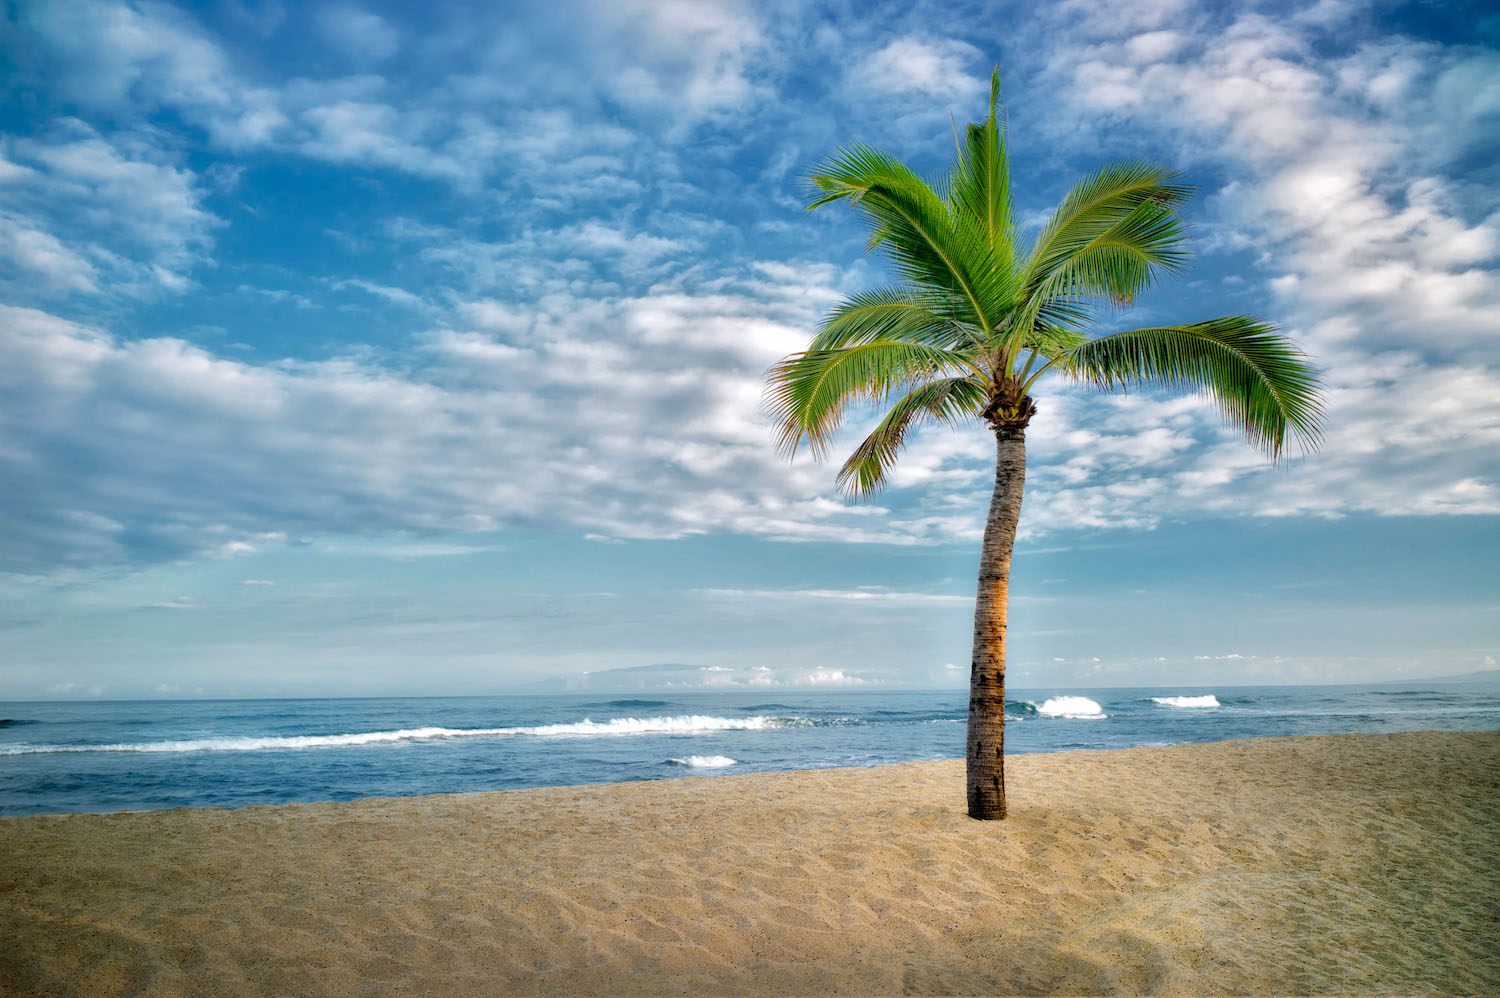 Most Islands Don't Actually Have Palm Trees on Them - Atlas Obscura